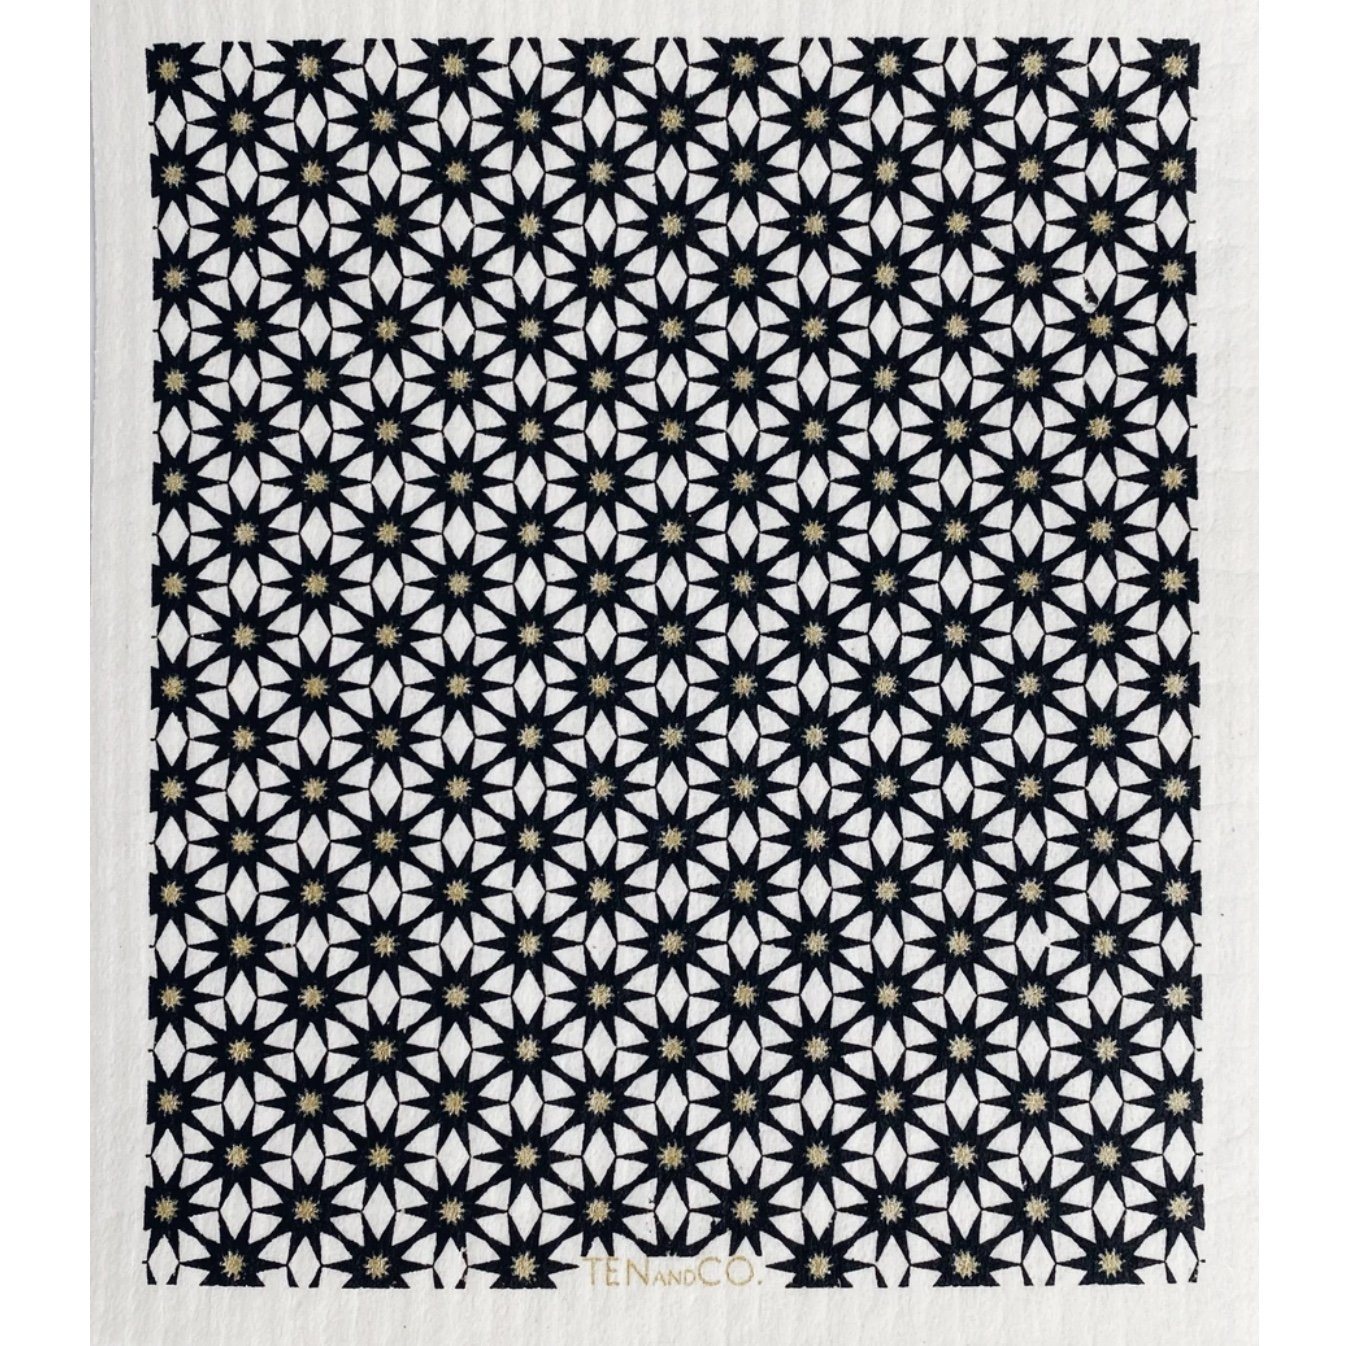 Reusable Swedish Sponge Cloth - Geometric - by Ten & Co Cleaning Ten and Co Starburst Gold Prettycleanshop